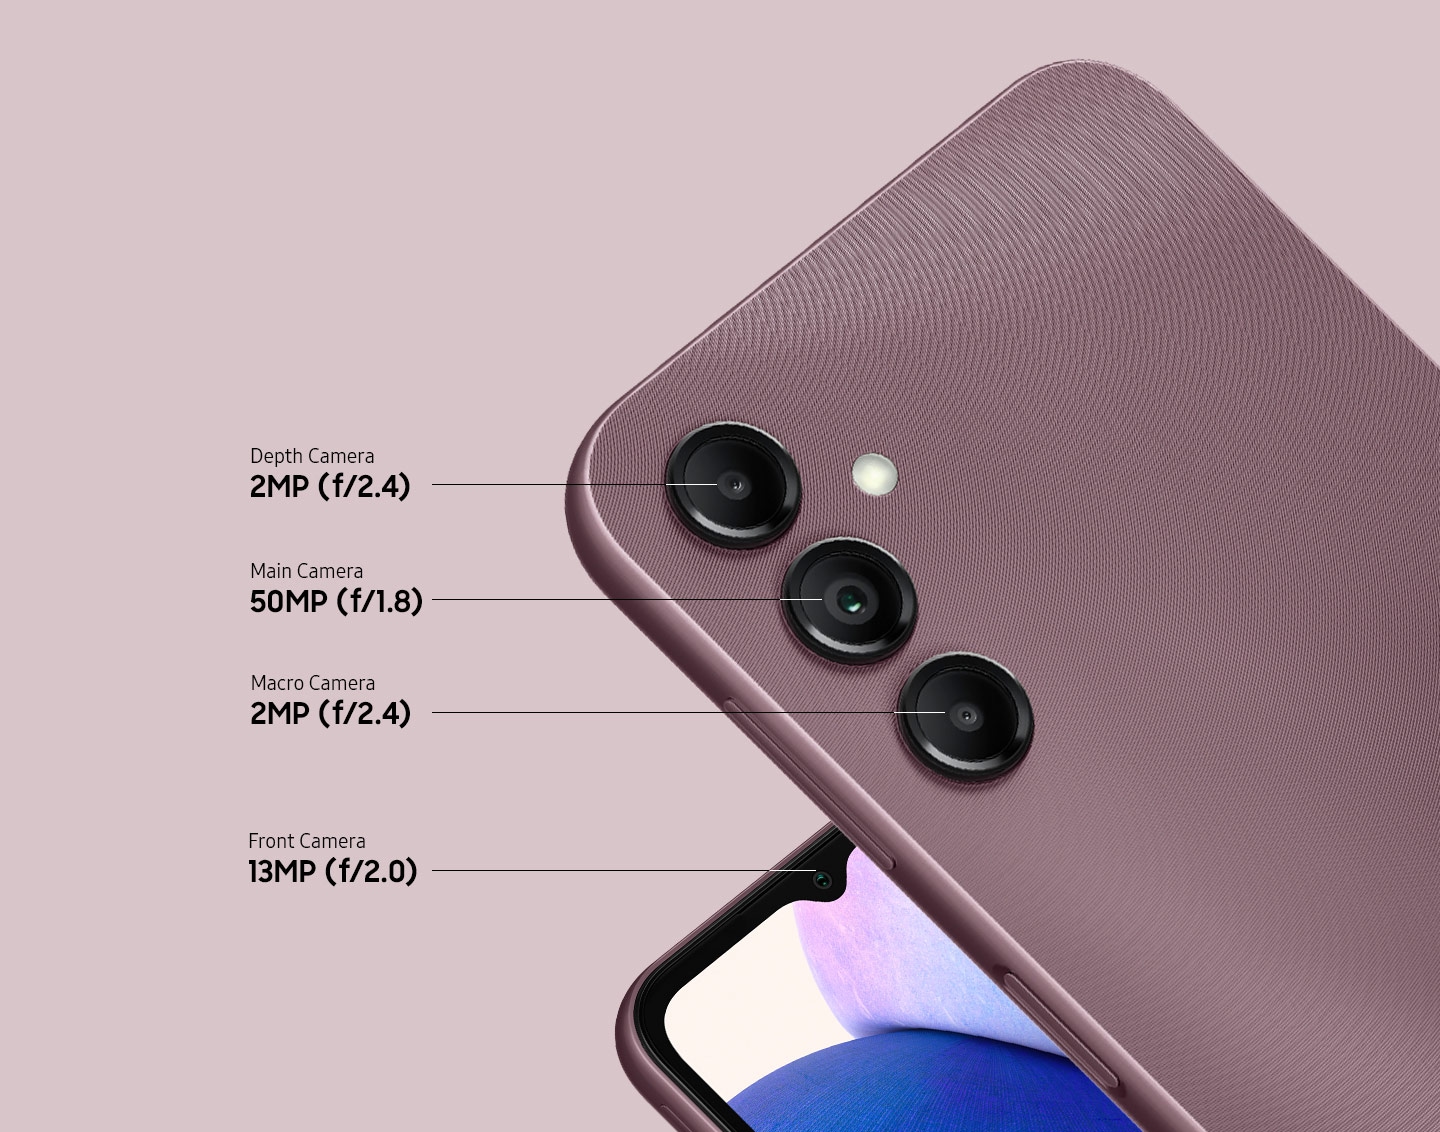 Two devices, both in light green, show the rear side and front side of the device. On the right, the rear side of the device shows the 2MP f2.4 Depth Camera, 50MP f1.8 Main Camera, and 2MP f2.4 Macro Camera. On the left, the front side of the device shows the 13MP f2.0 Front Camera.